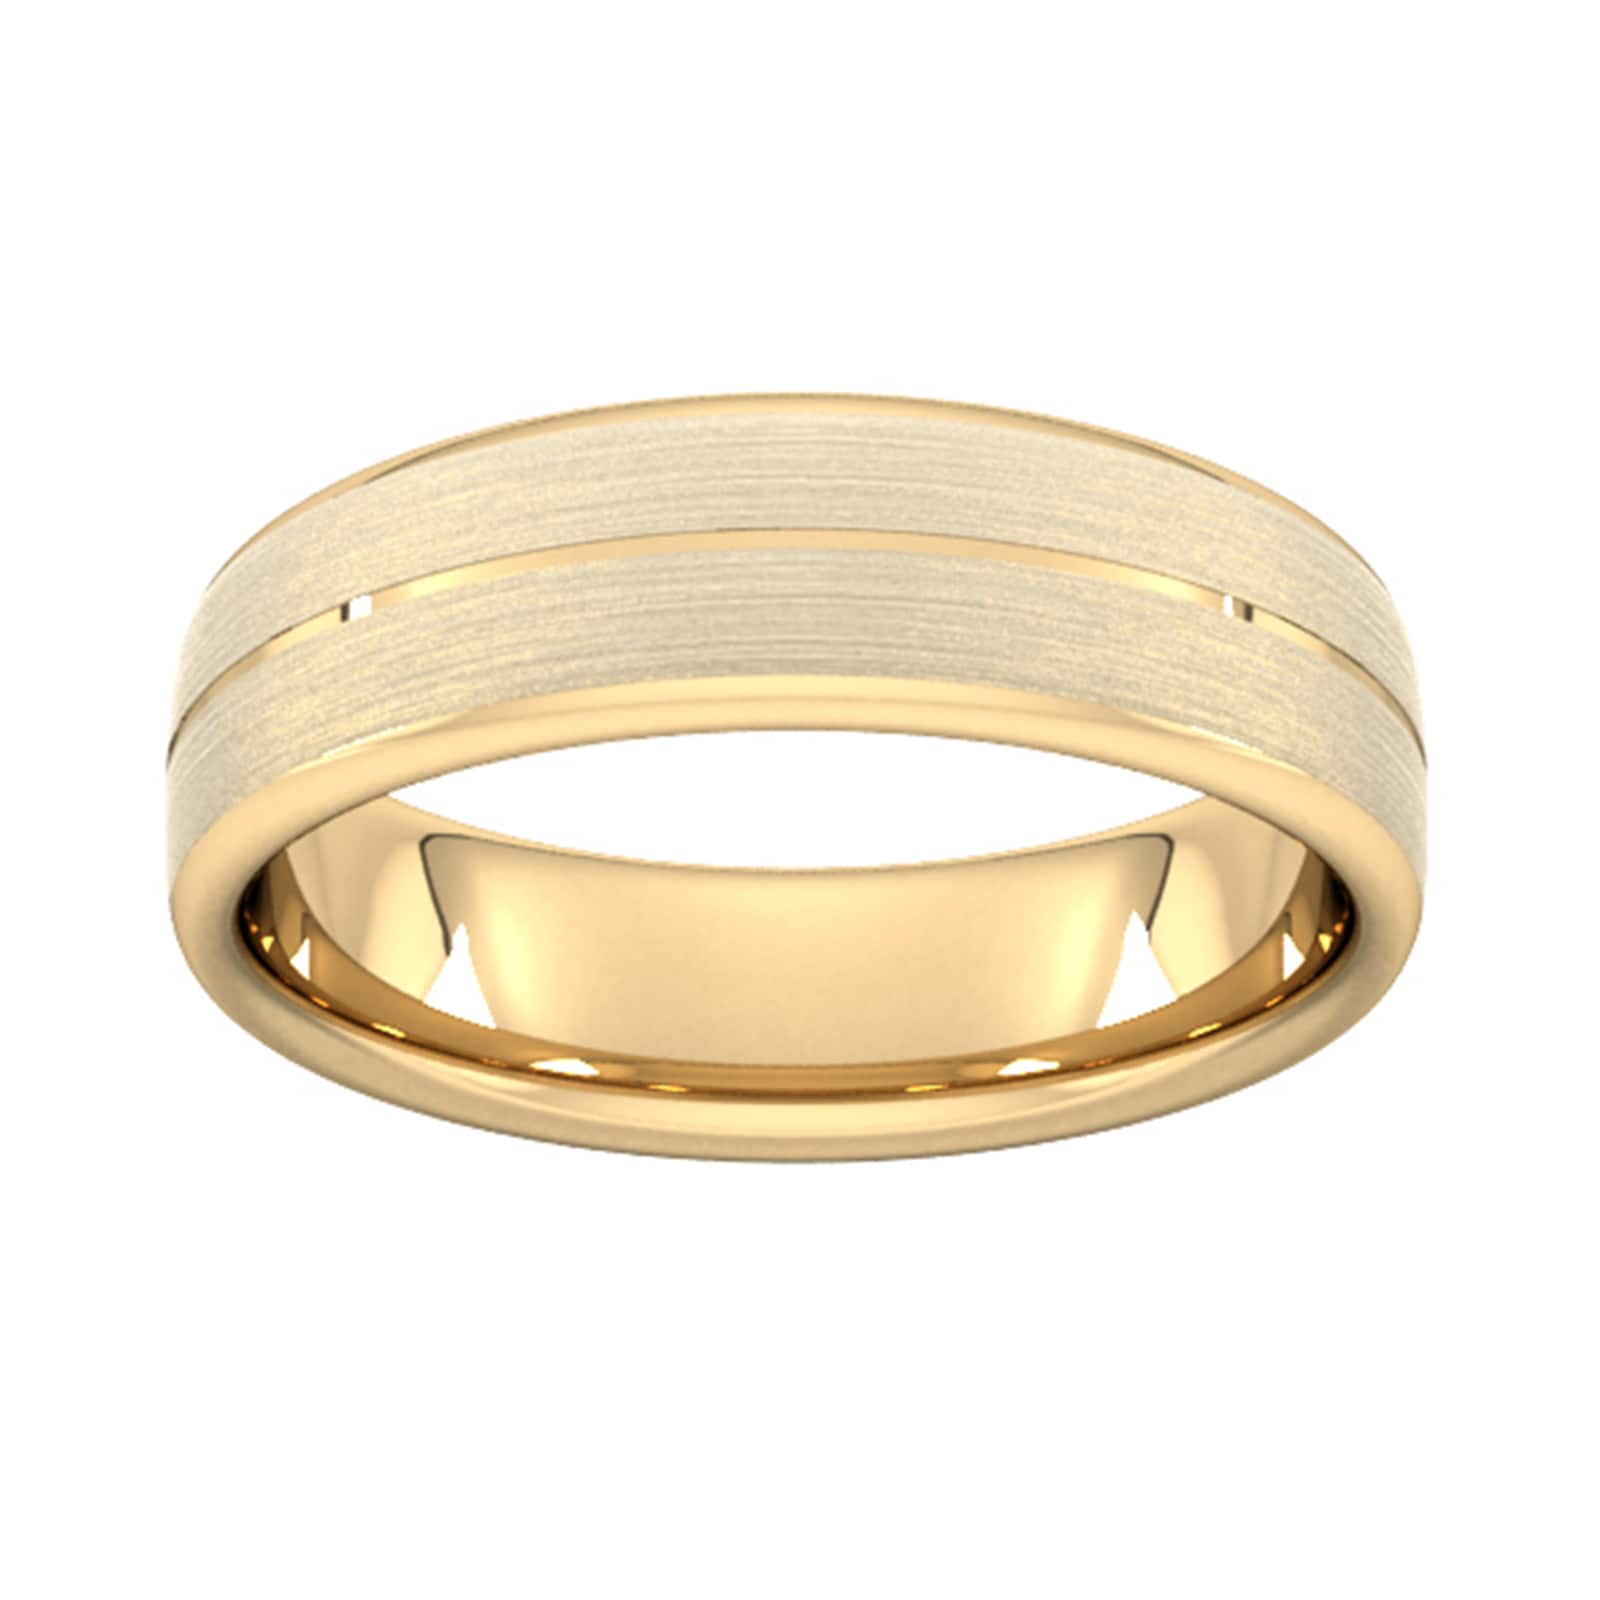 6mm Slight Court Extra Heavy Centre Groove With Chamfered Edge Wedding Ring In 9 Carat Yellow Gold - Ring Size S